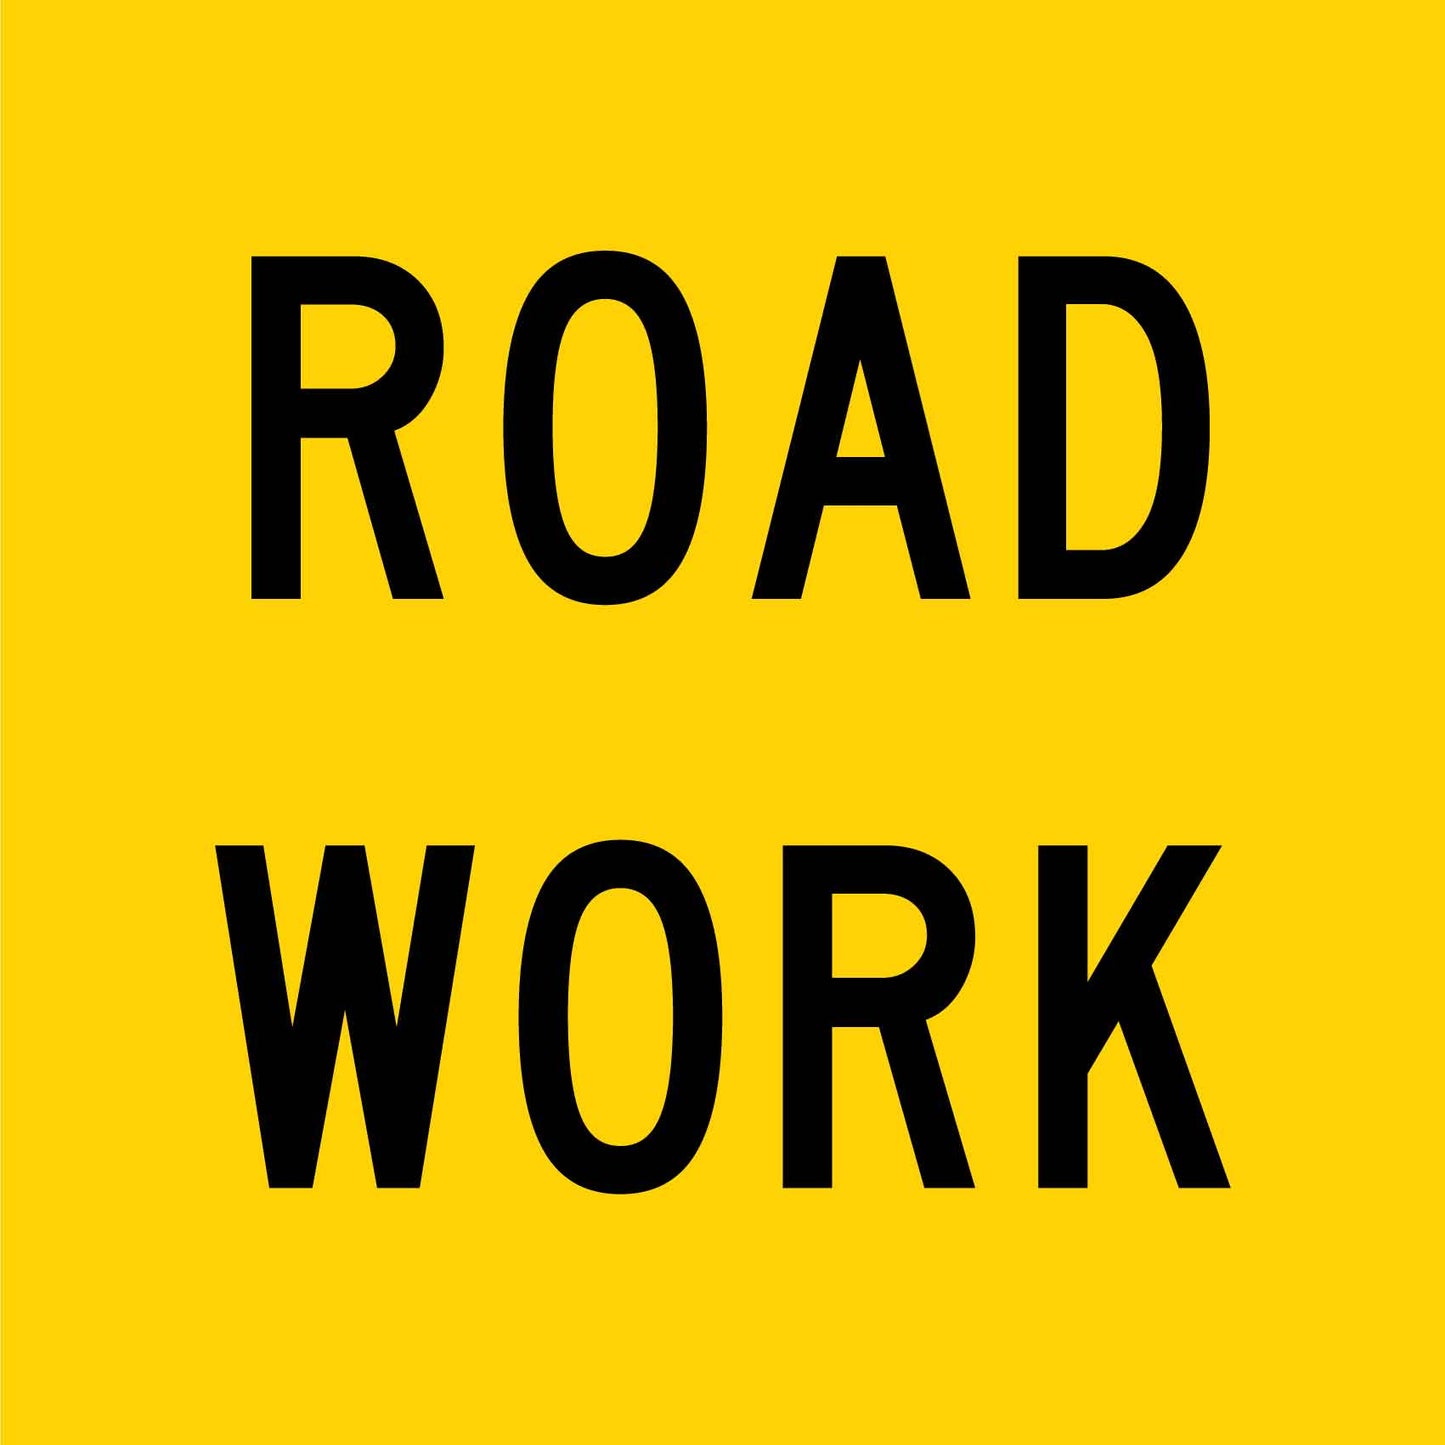 Road Work Multi Message Traffic Sign